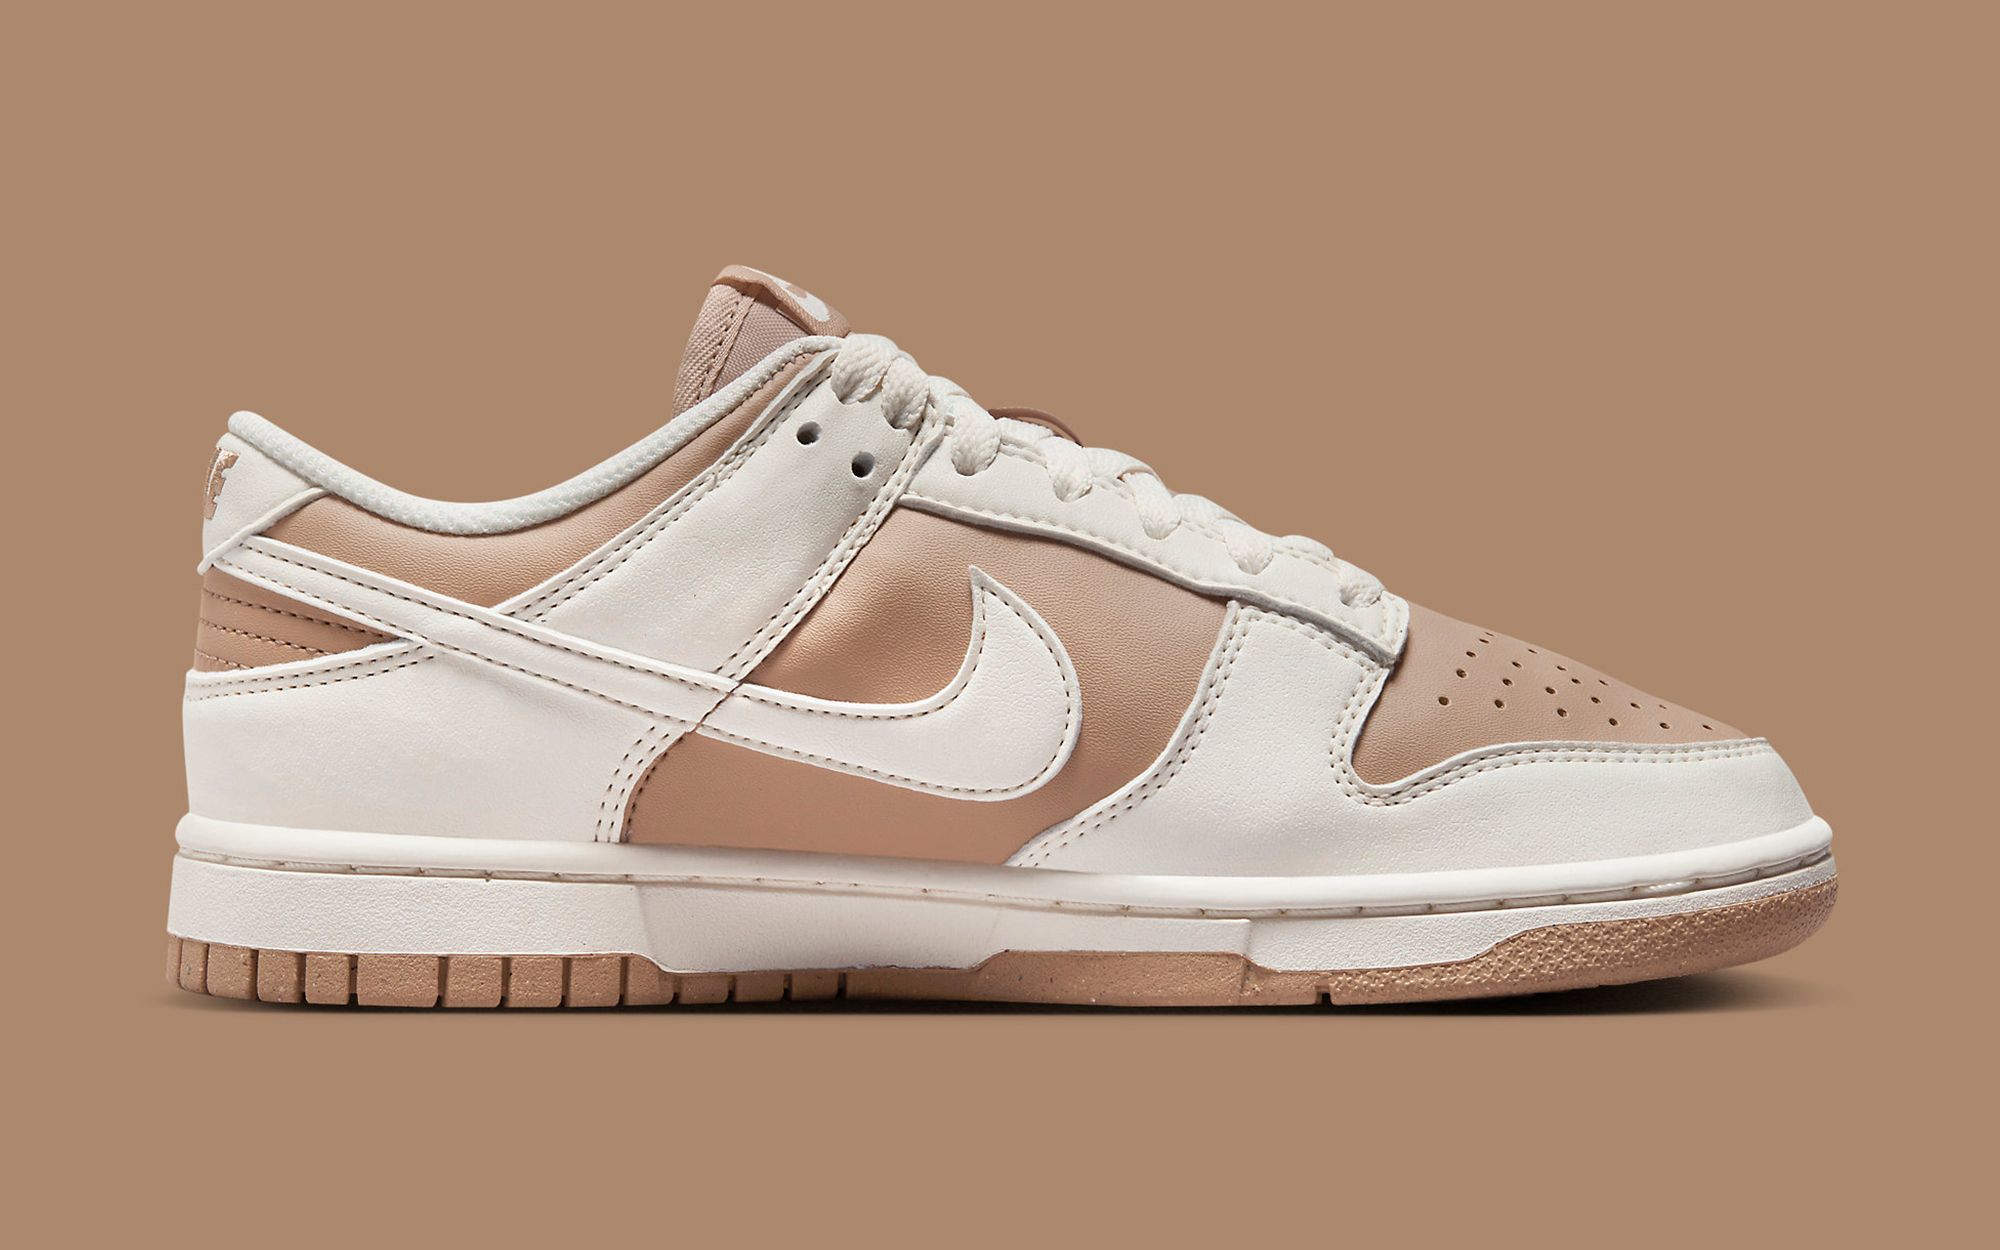 Where to Buy the Nike Dunk Low Next Nature “Hemp” | House of Heat°